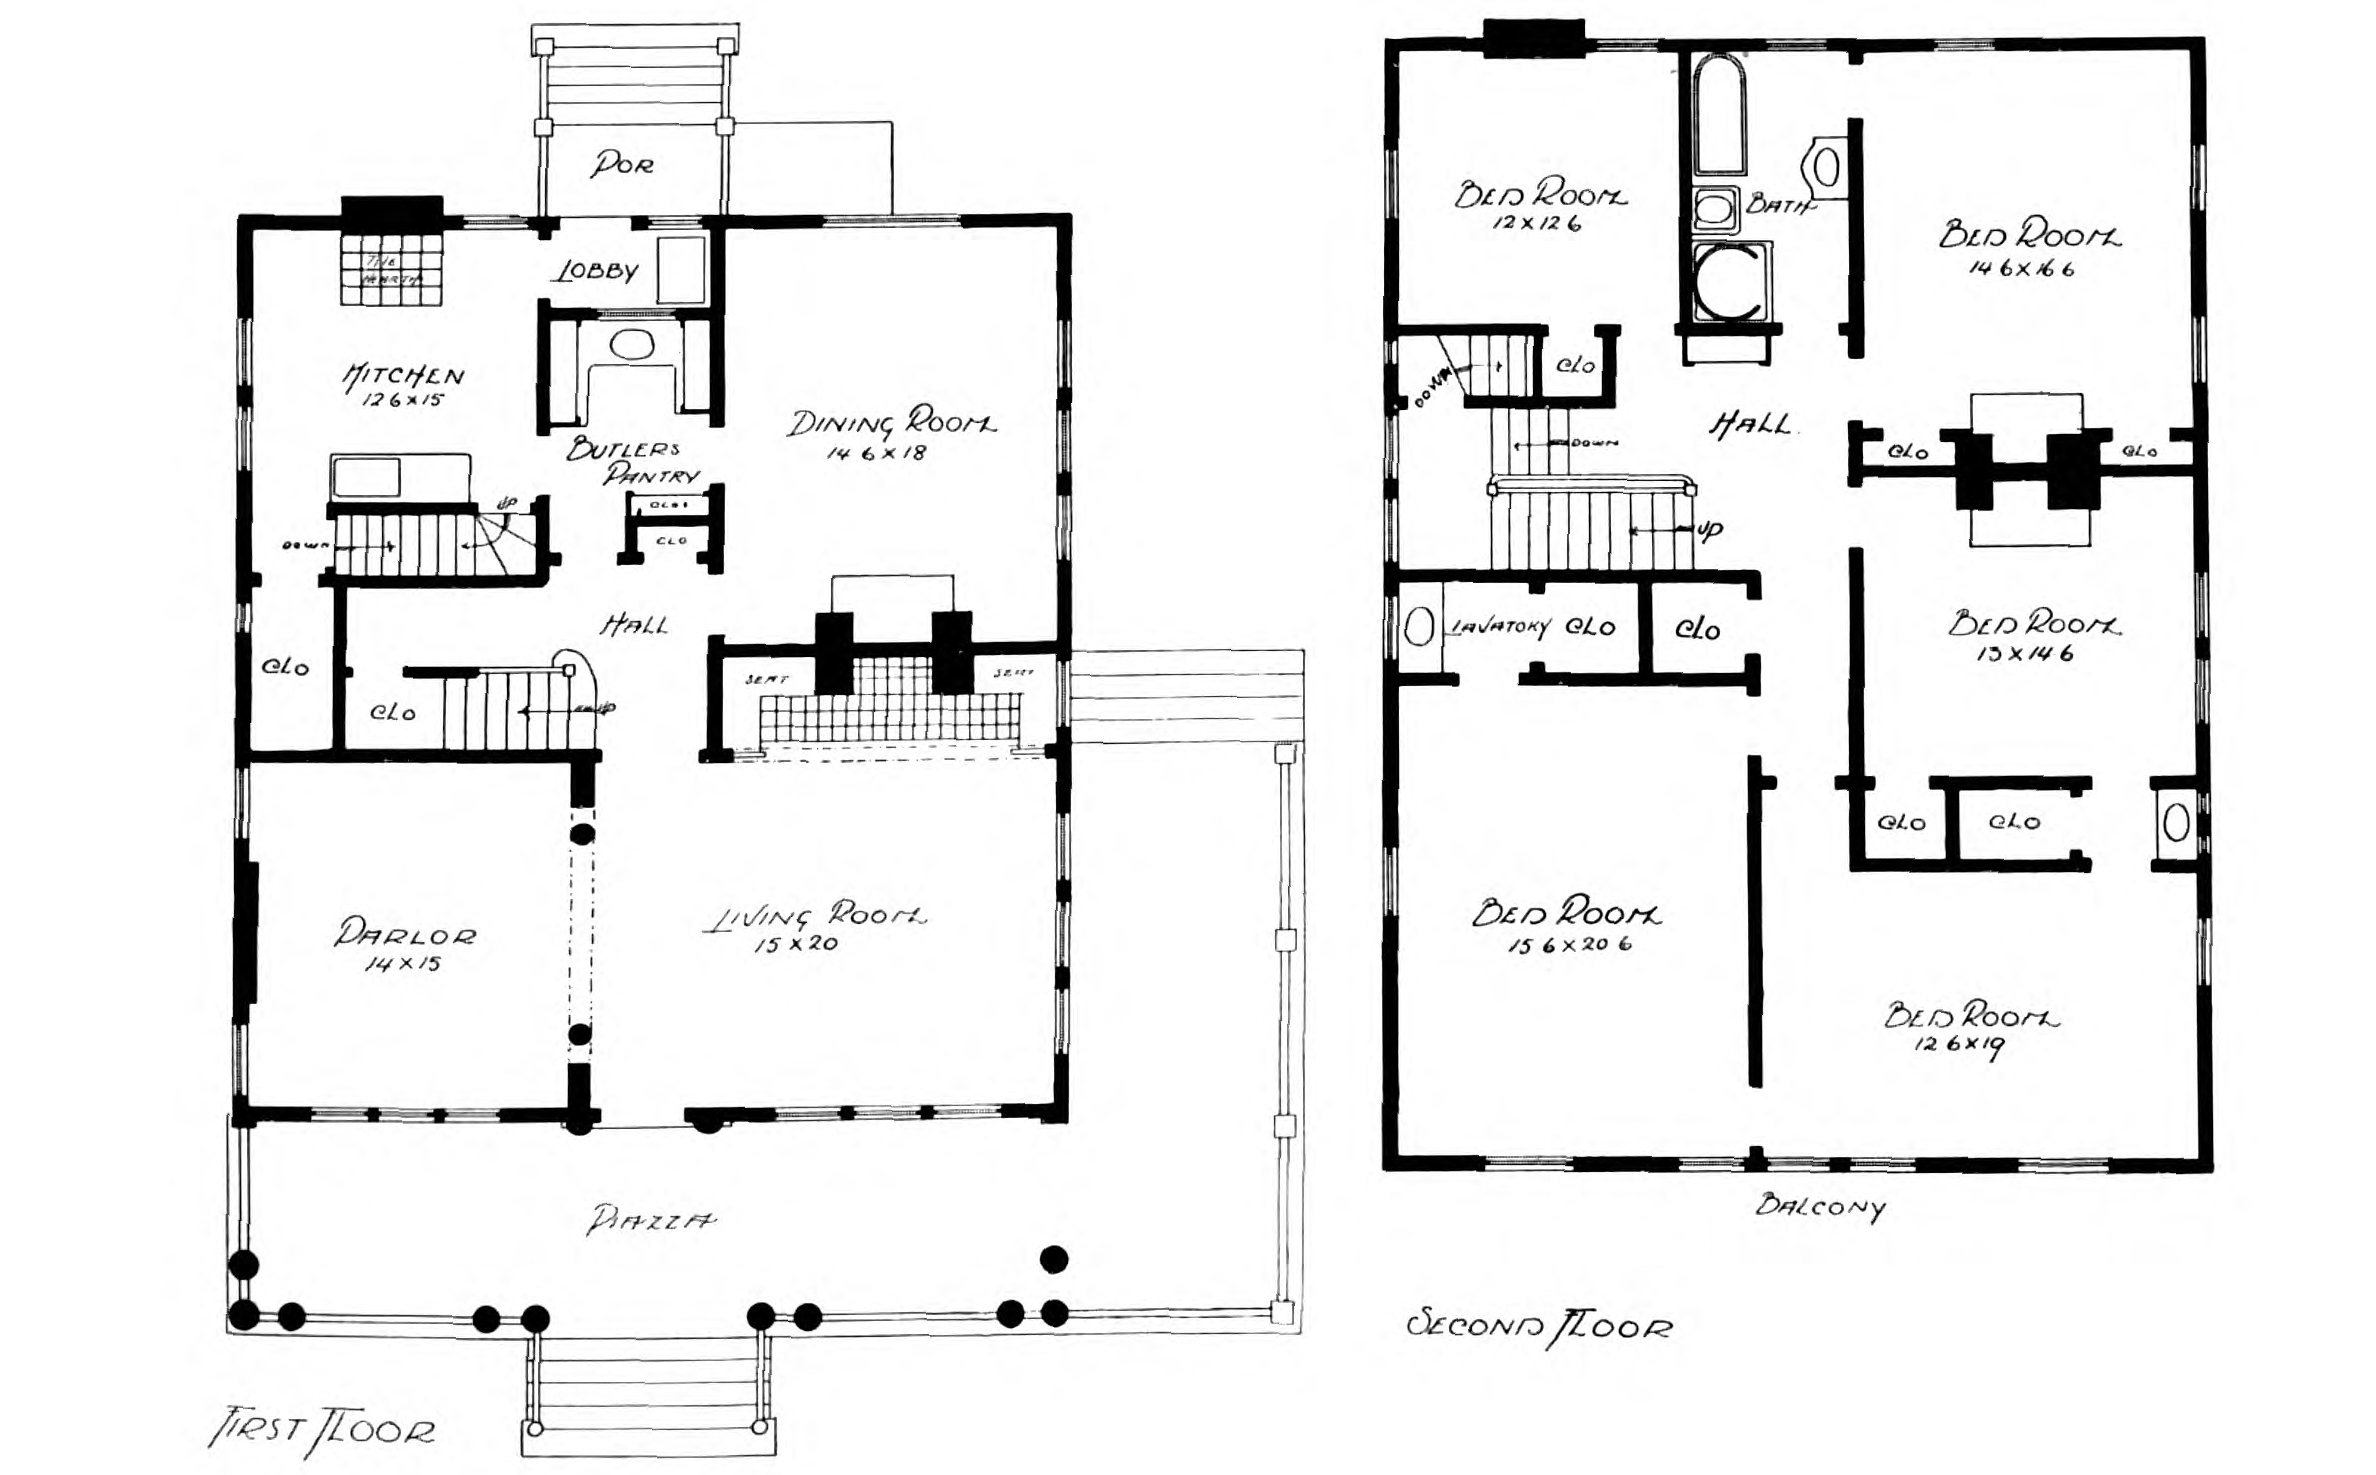 floor plans for the first and second floor